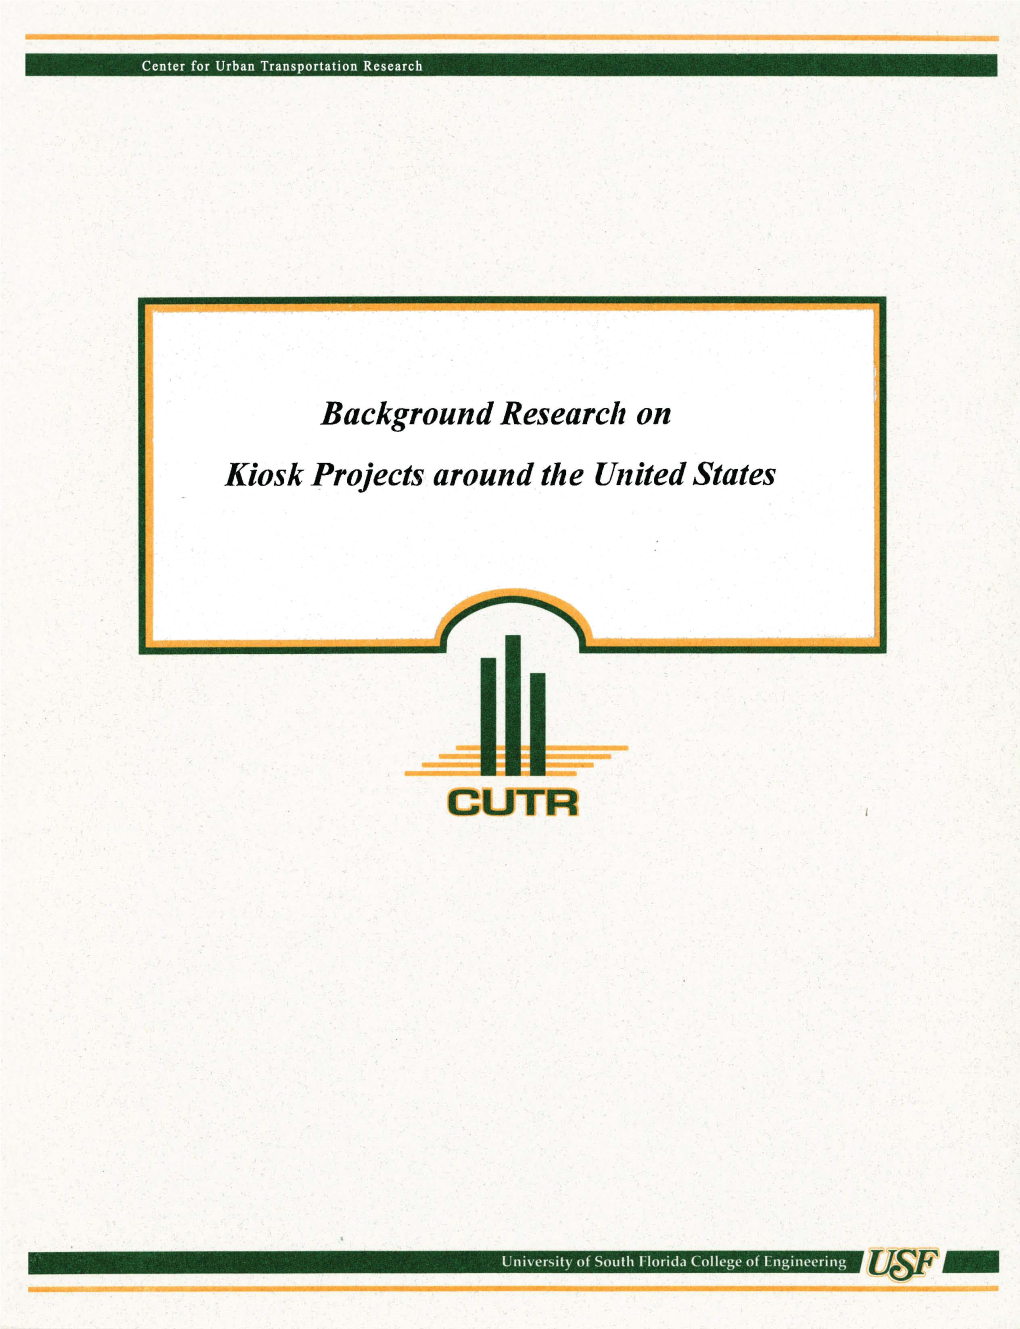 Background Research on Kiosk Projects Around the United States